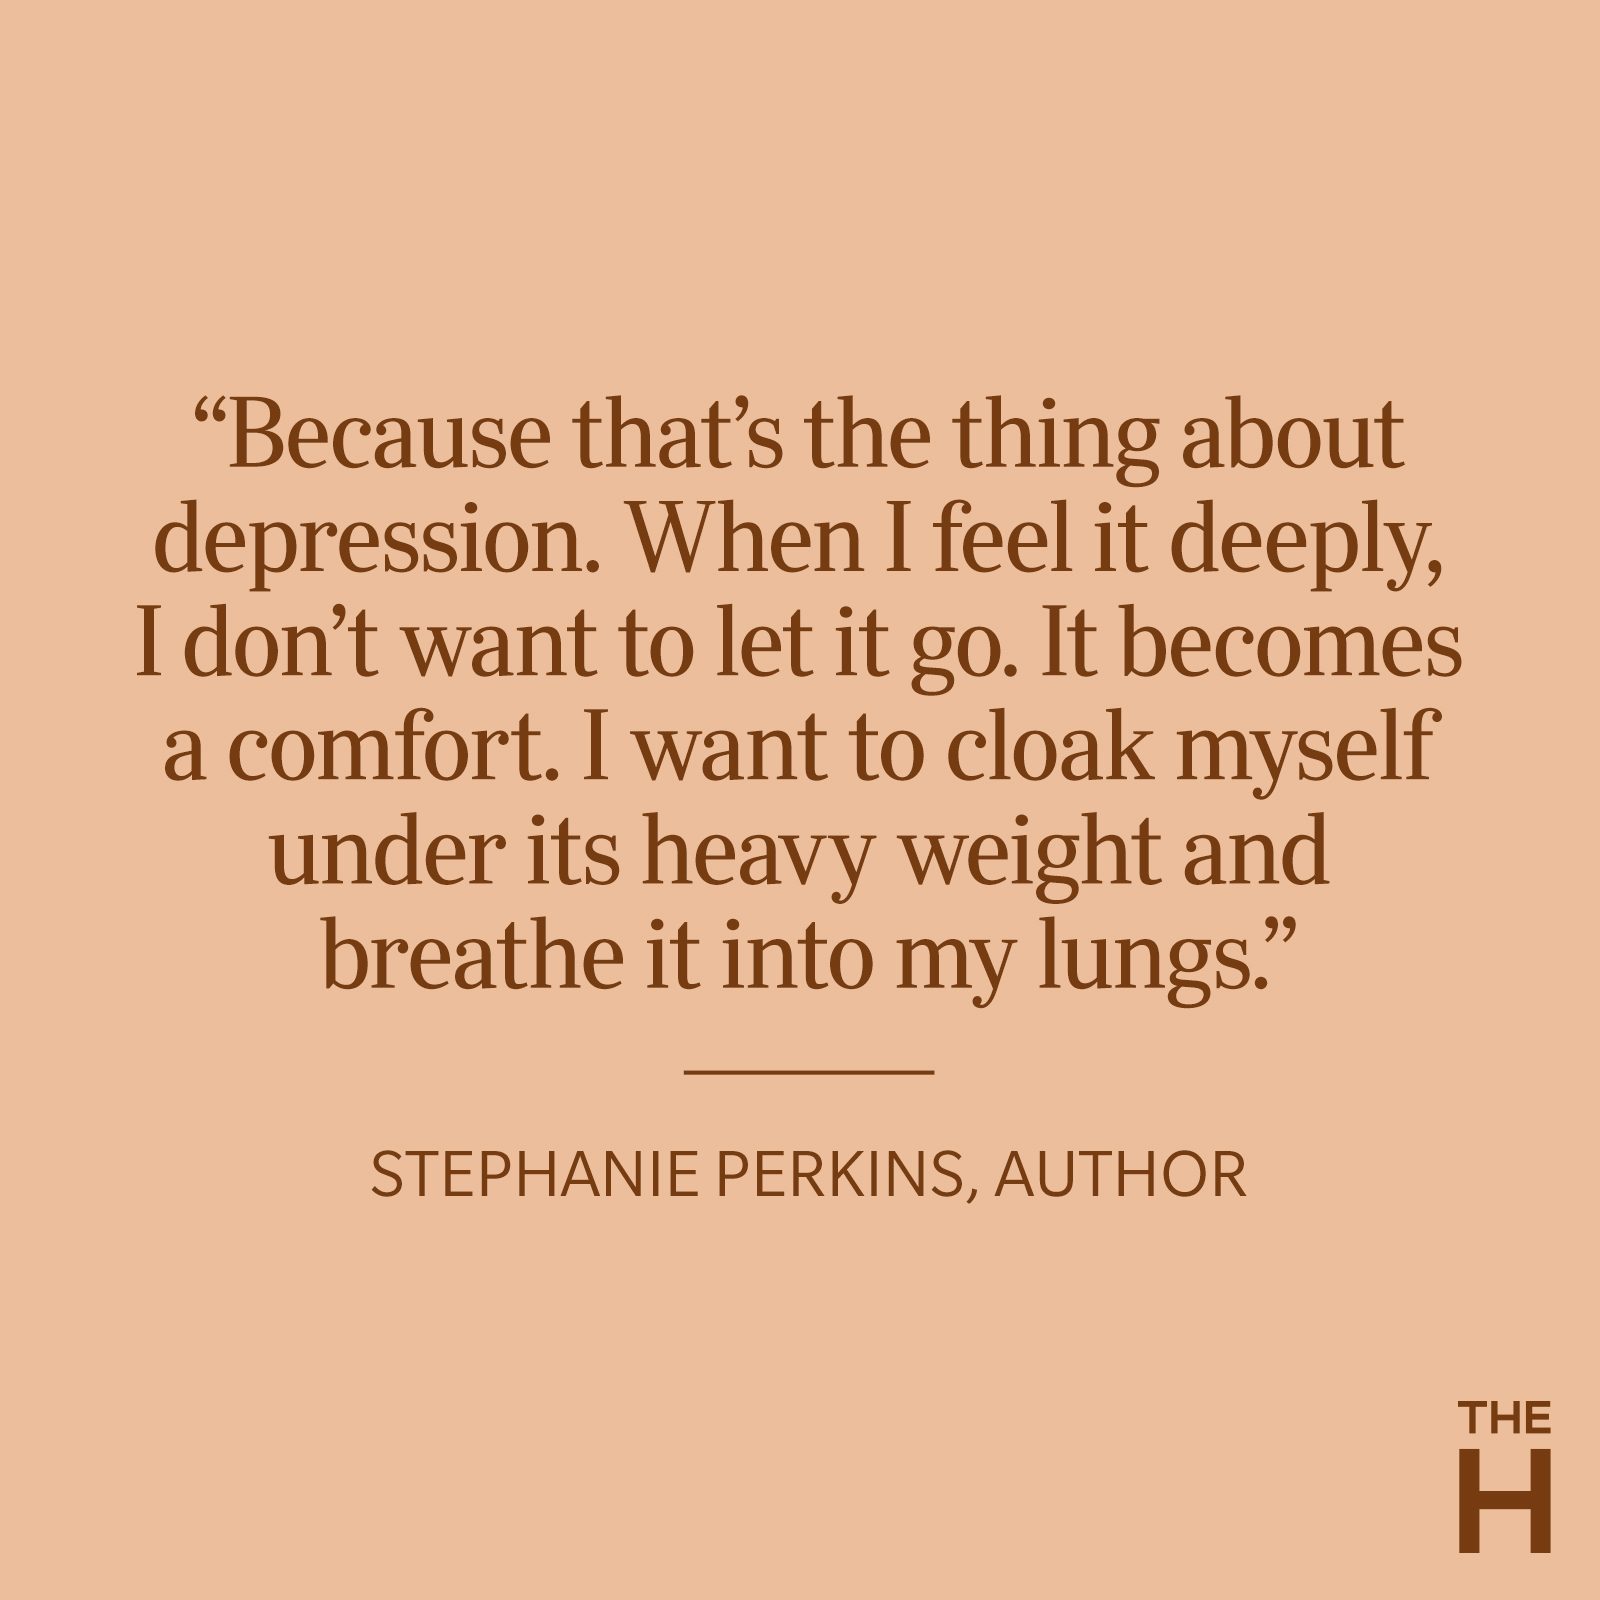 https://www.thehealthy.com/wp-content/uploads/2022/01/stephanie-perkins-depression-quote.jpg?fit=700%2C700